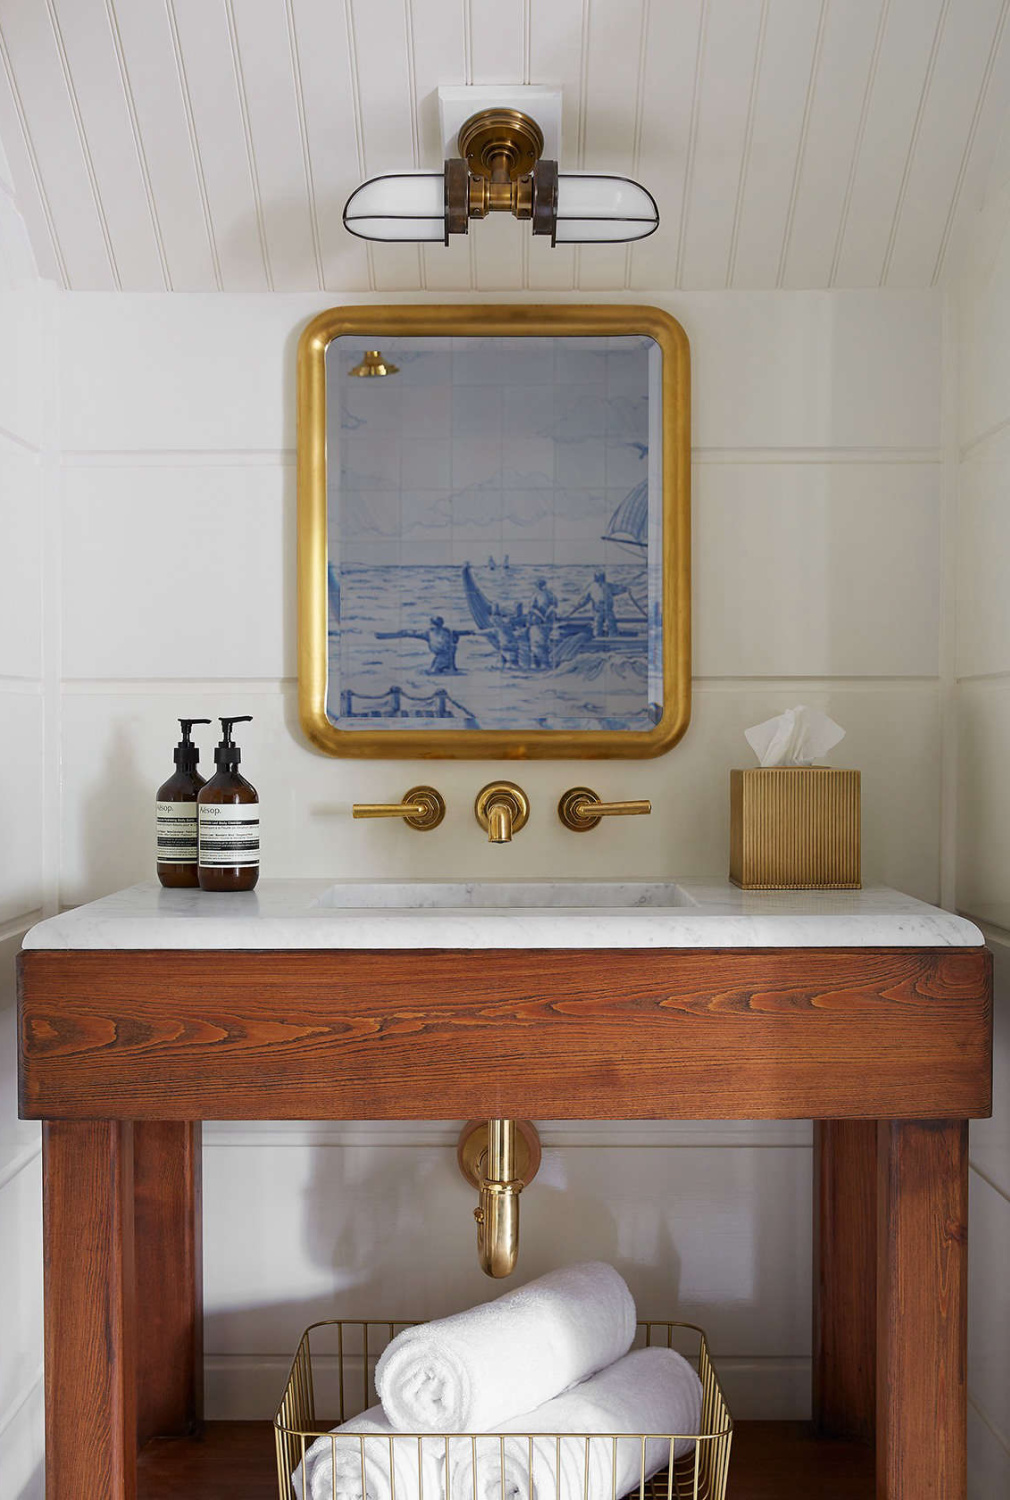 Showers are lined in maritime scenes made of Portuguese tiles, and sconces on the eaves have an air of recycled industrial corridor lights. The boxy and unpainted sink vanities, reminiscent of 19th-century farmhouse washstands, leave glossy pipes exposed.